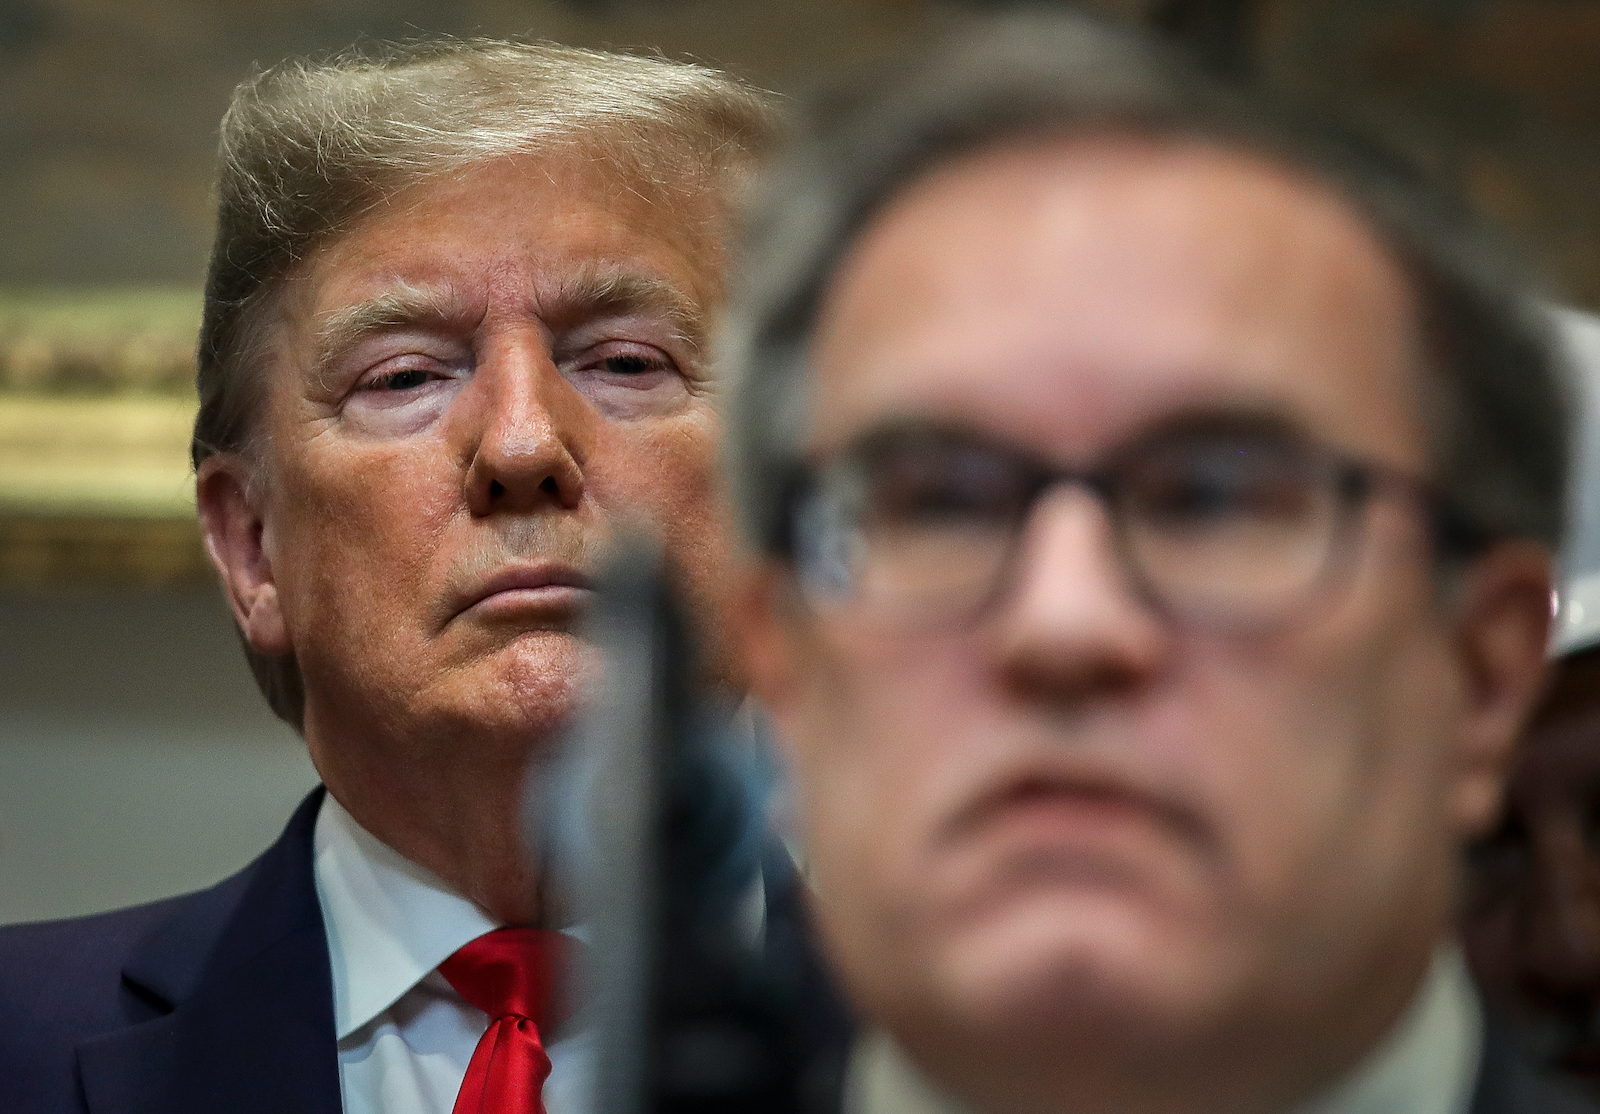 President Trump wears a red tie and suit and sits directly behind Andrew wheeler, seen wearing glasses